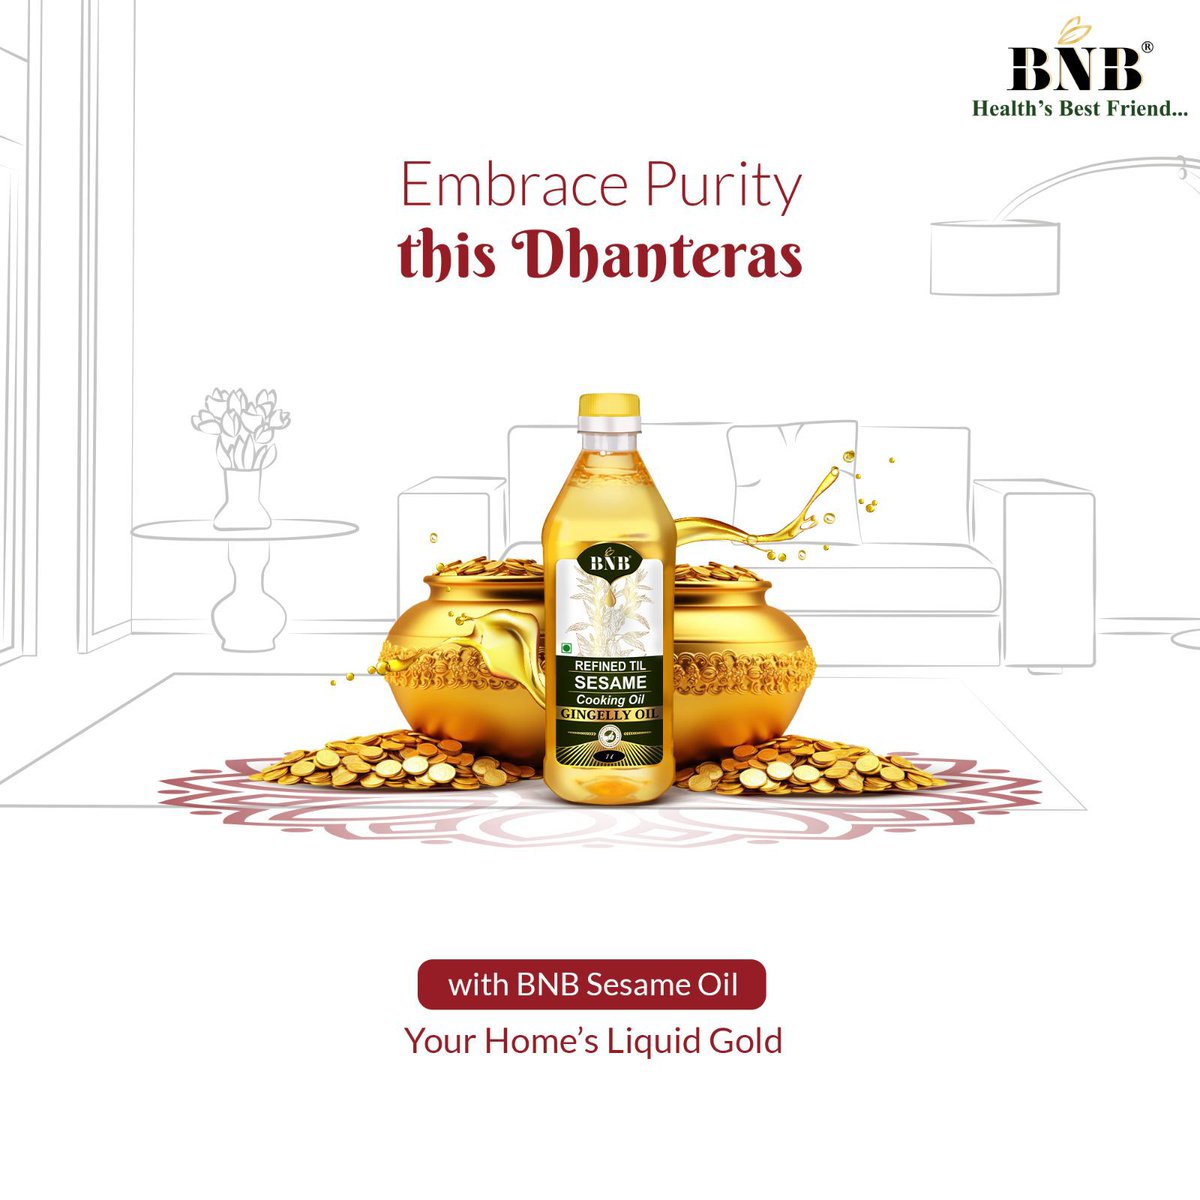 🌟 BNB wishes you a Dhanteras filled with good wealth and positive vibes!

🌟🪔May this festive occasion bring you joy, prosperity, and well-being.🪔

Happy Dhanteras!🪔 💫

#shubhdhanteras #dhanteras #switchtoBNB #Refinesesameoil #healthiswealth #sesame #BNB #healthyfood